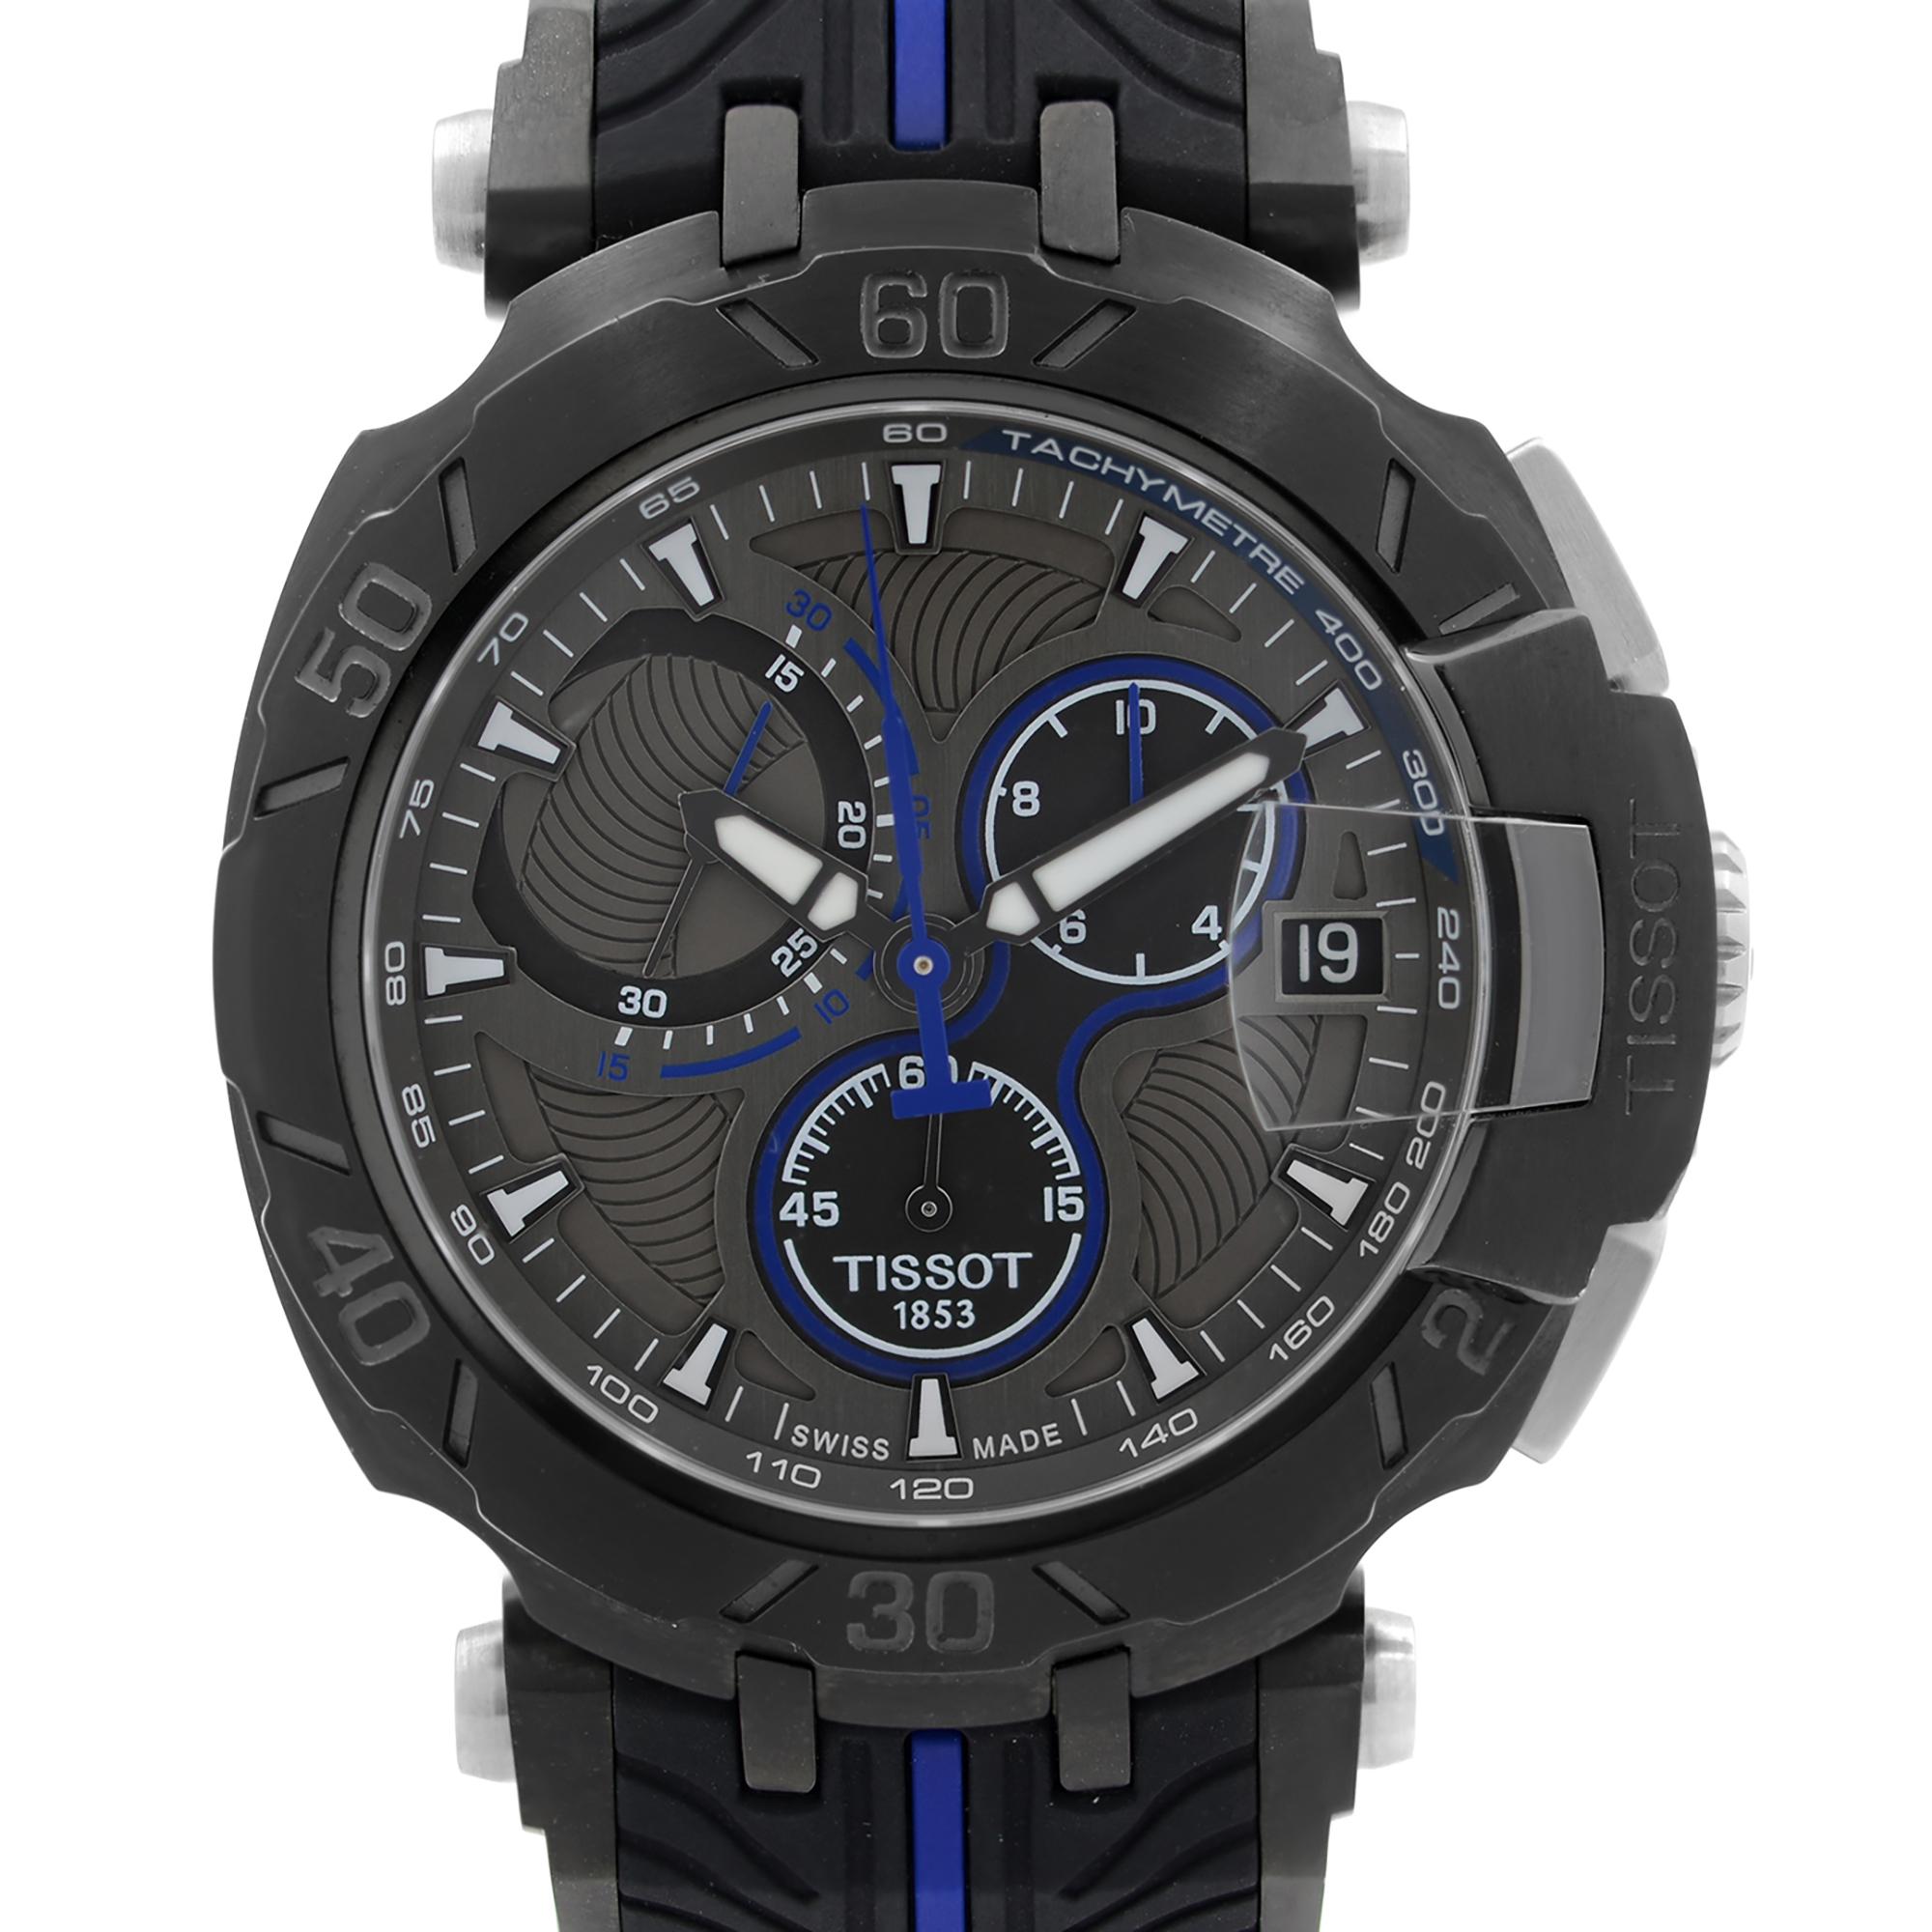 Display Model Tissot T-Race MotoGP Limited Edition Black PVD Stainless Steel Chronograph Quartz Mens Watch T092.417.37.061.00. The Watch has Minor Blemishes Due to Store Handling and a Little Dent on a Bottom Chronograph Push Button. This Beautiful